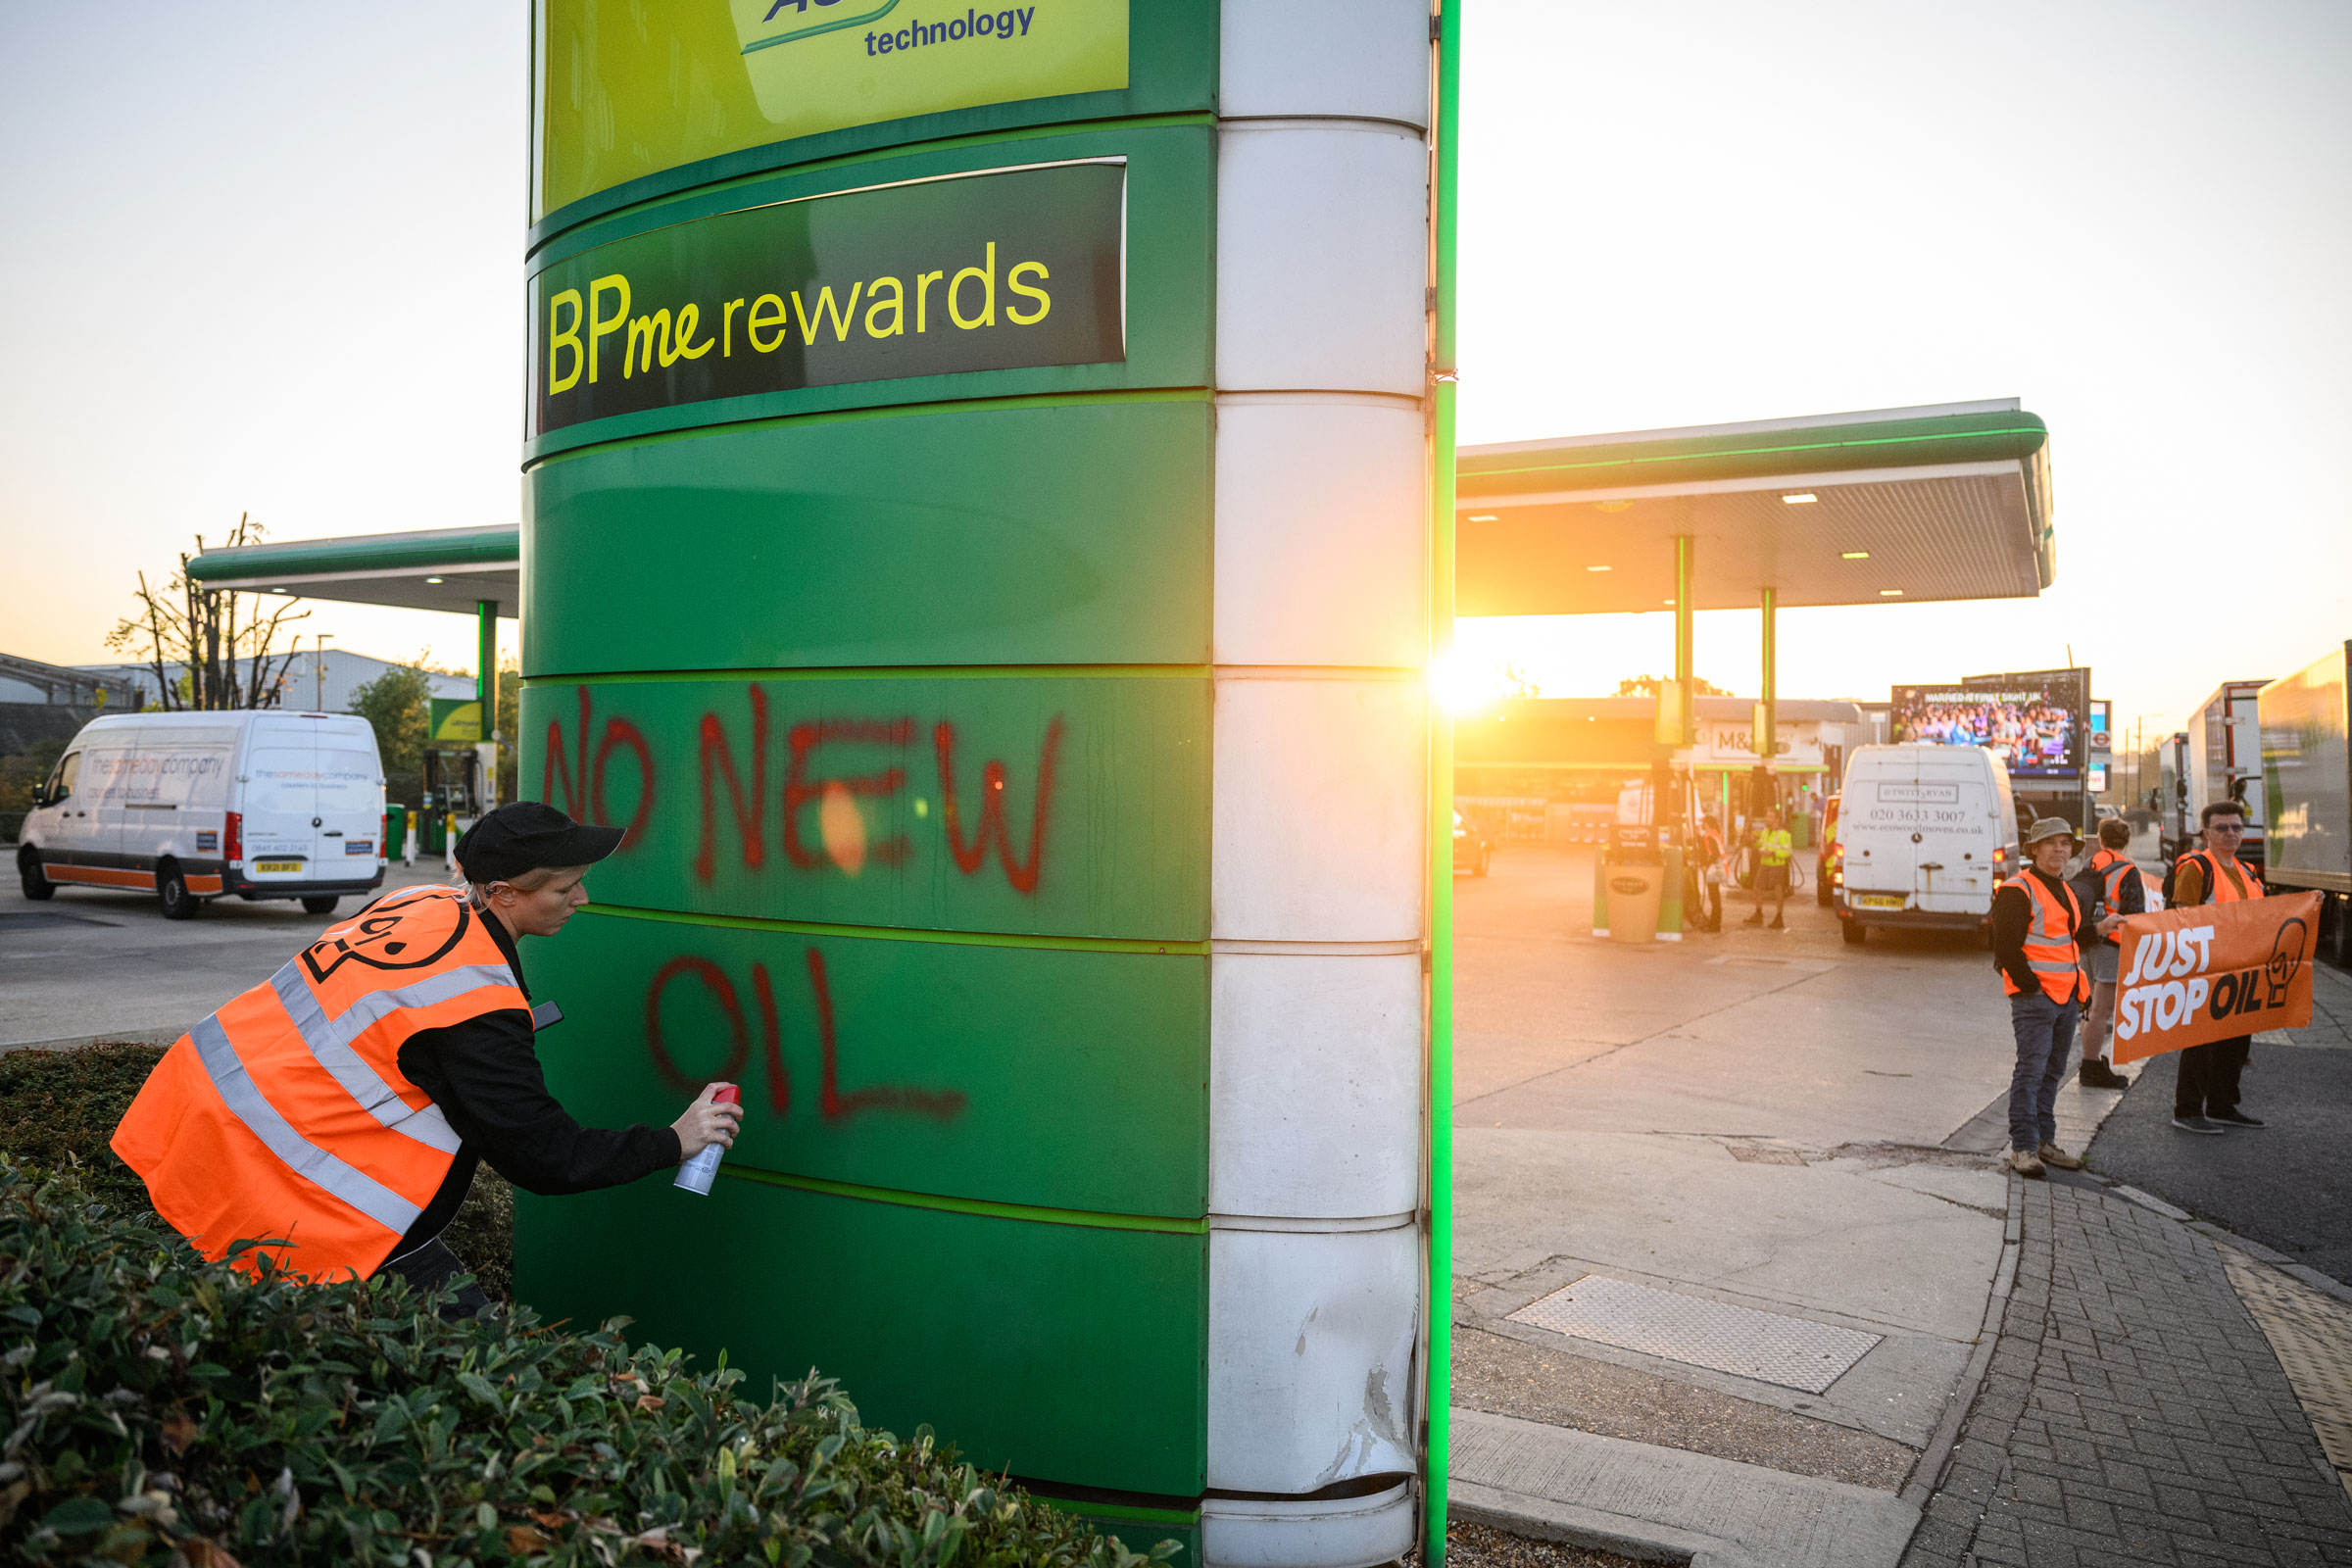 A woman sprays a message reading “No New Oil” on a sign outside a BP petrol station during an action by the Just Stop Oil environmental protest group in London on Aug. 26, 2022. (Leon Neal—Getty Images)